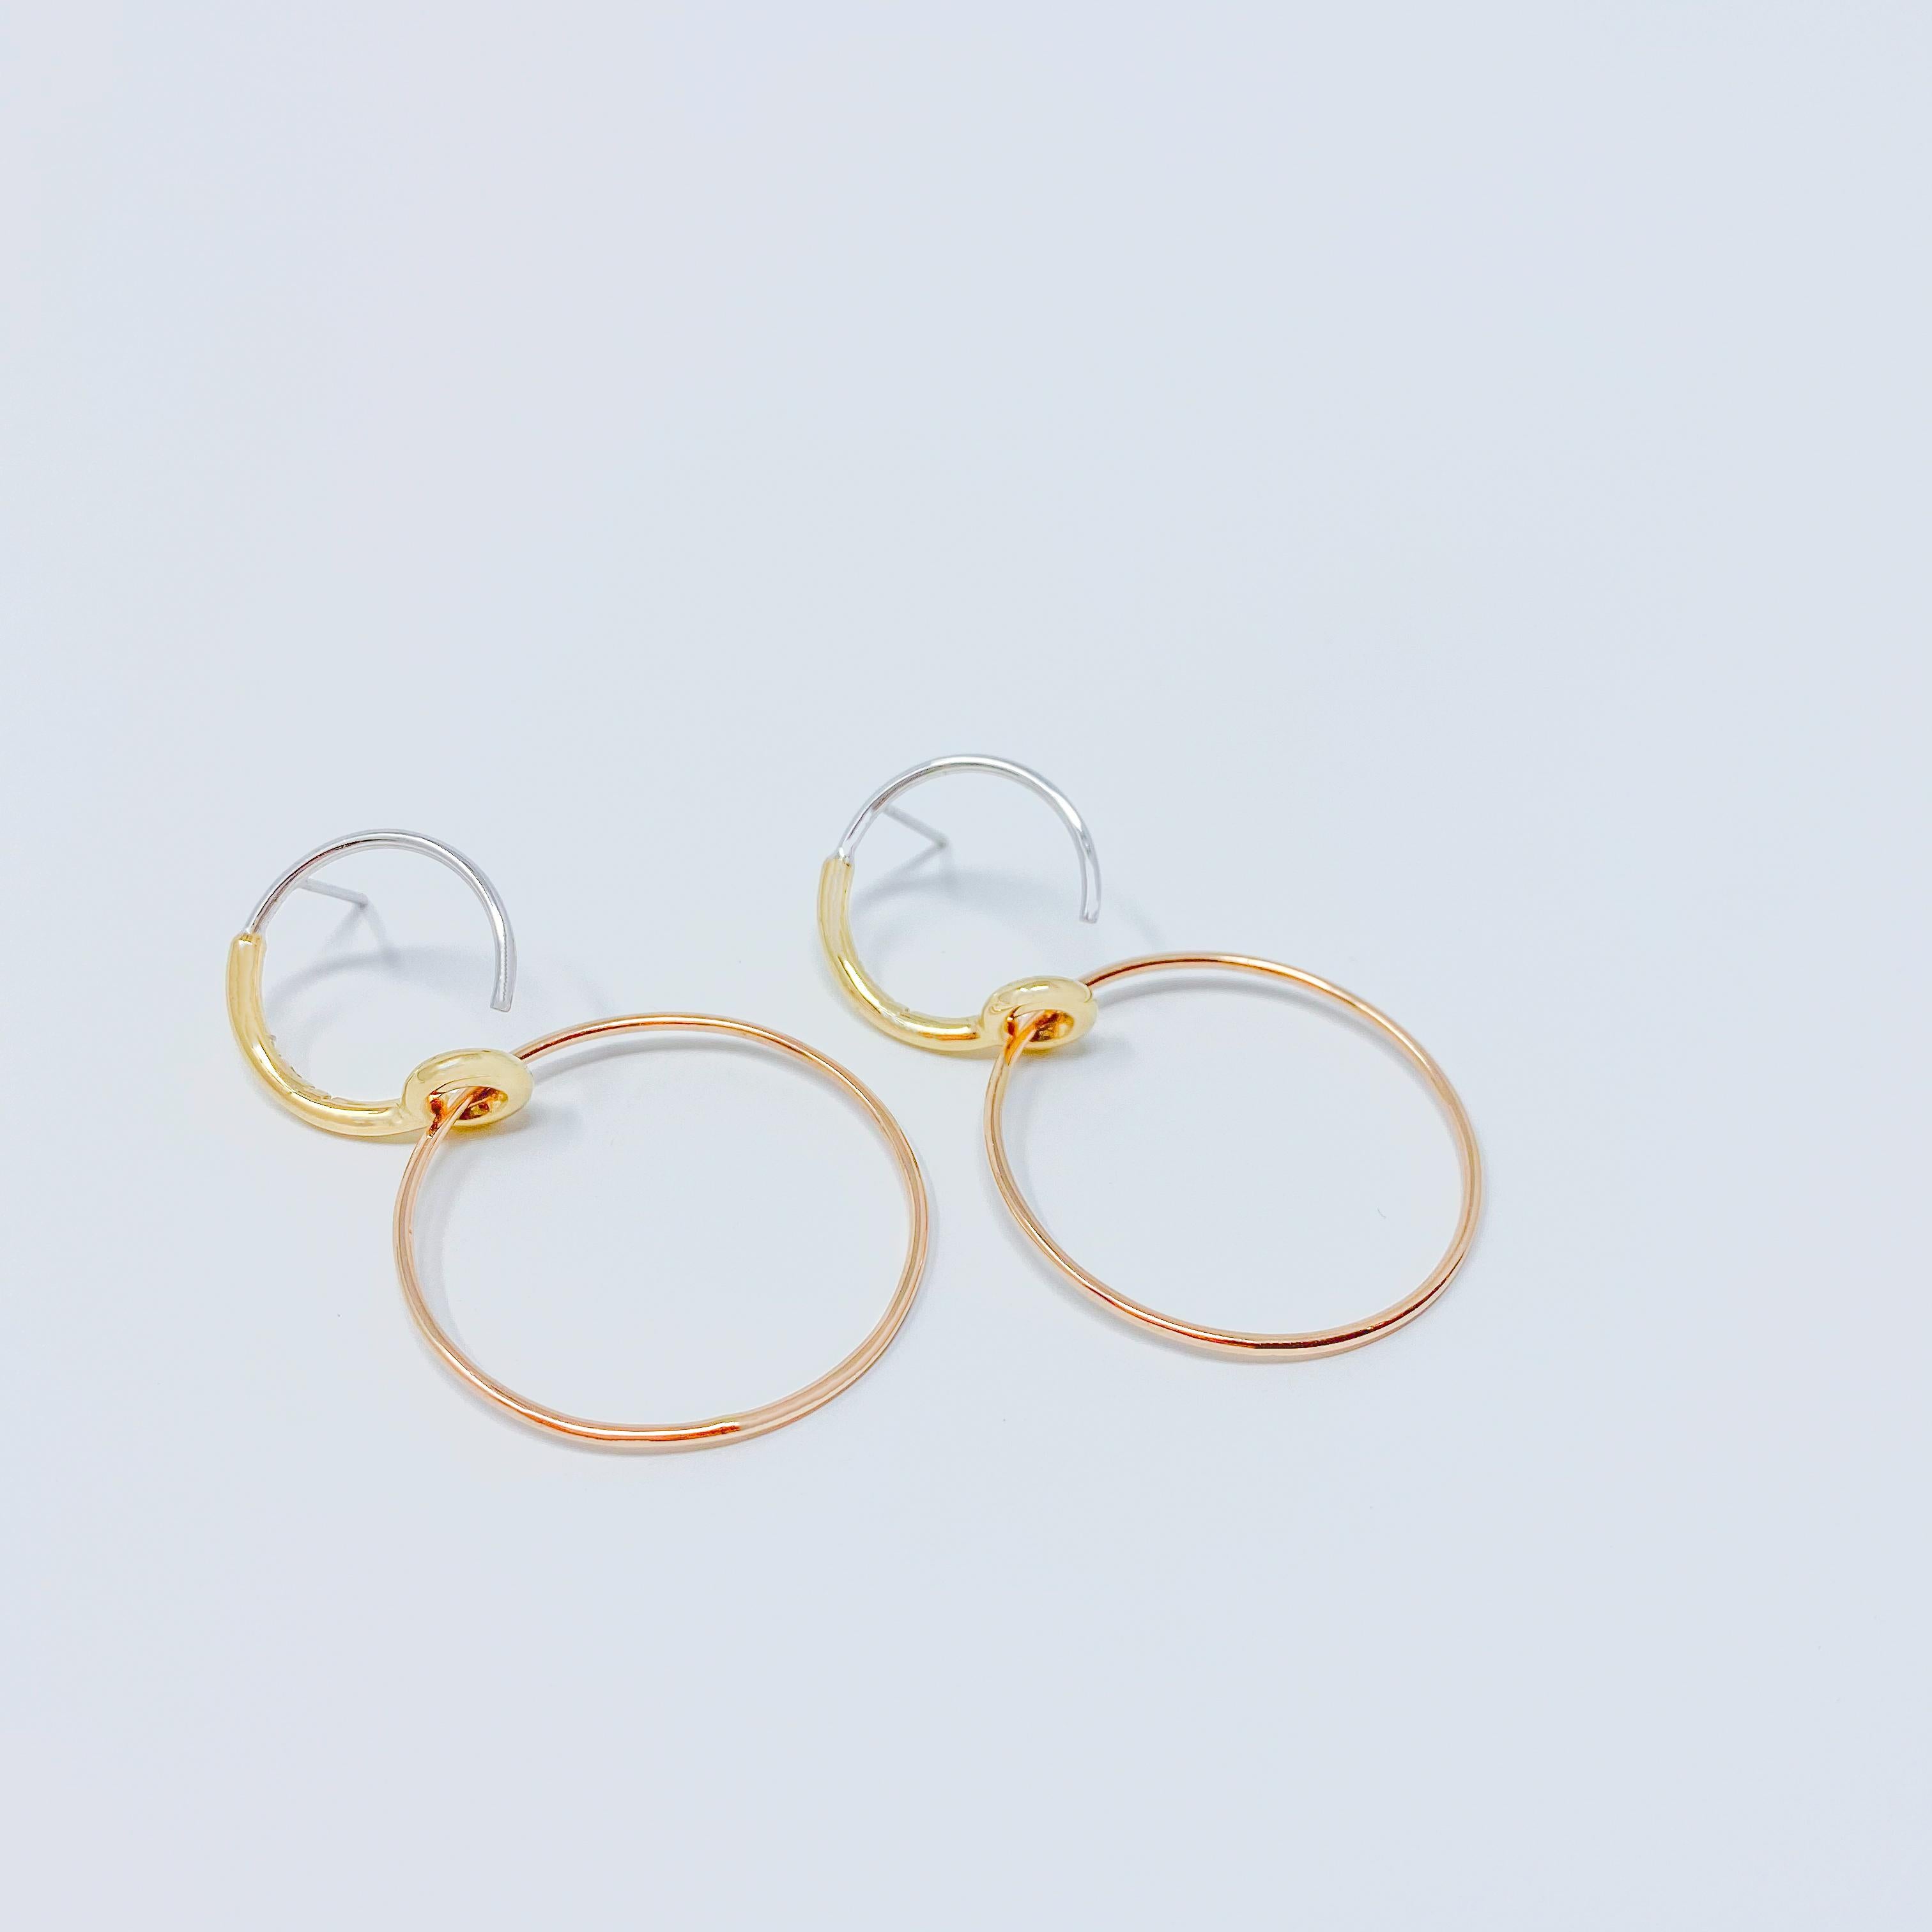 Líeu Destin Earrings in 14k Yellow Gold, 14k Rose Gold, and 14k White Gold In New Condition For Sale In Brooklyn, NY